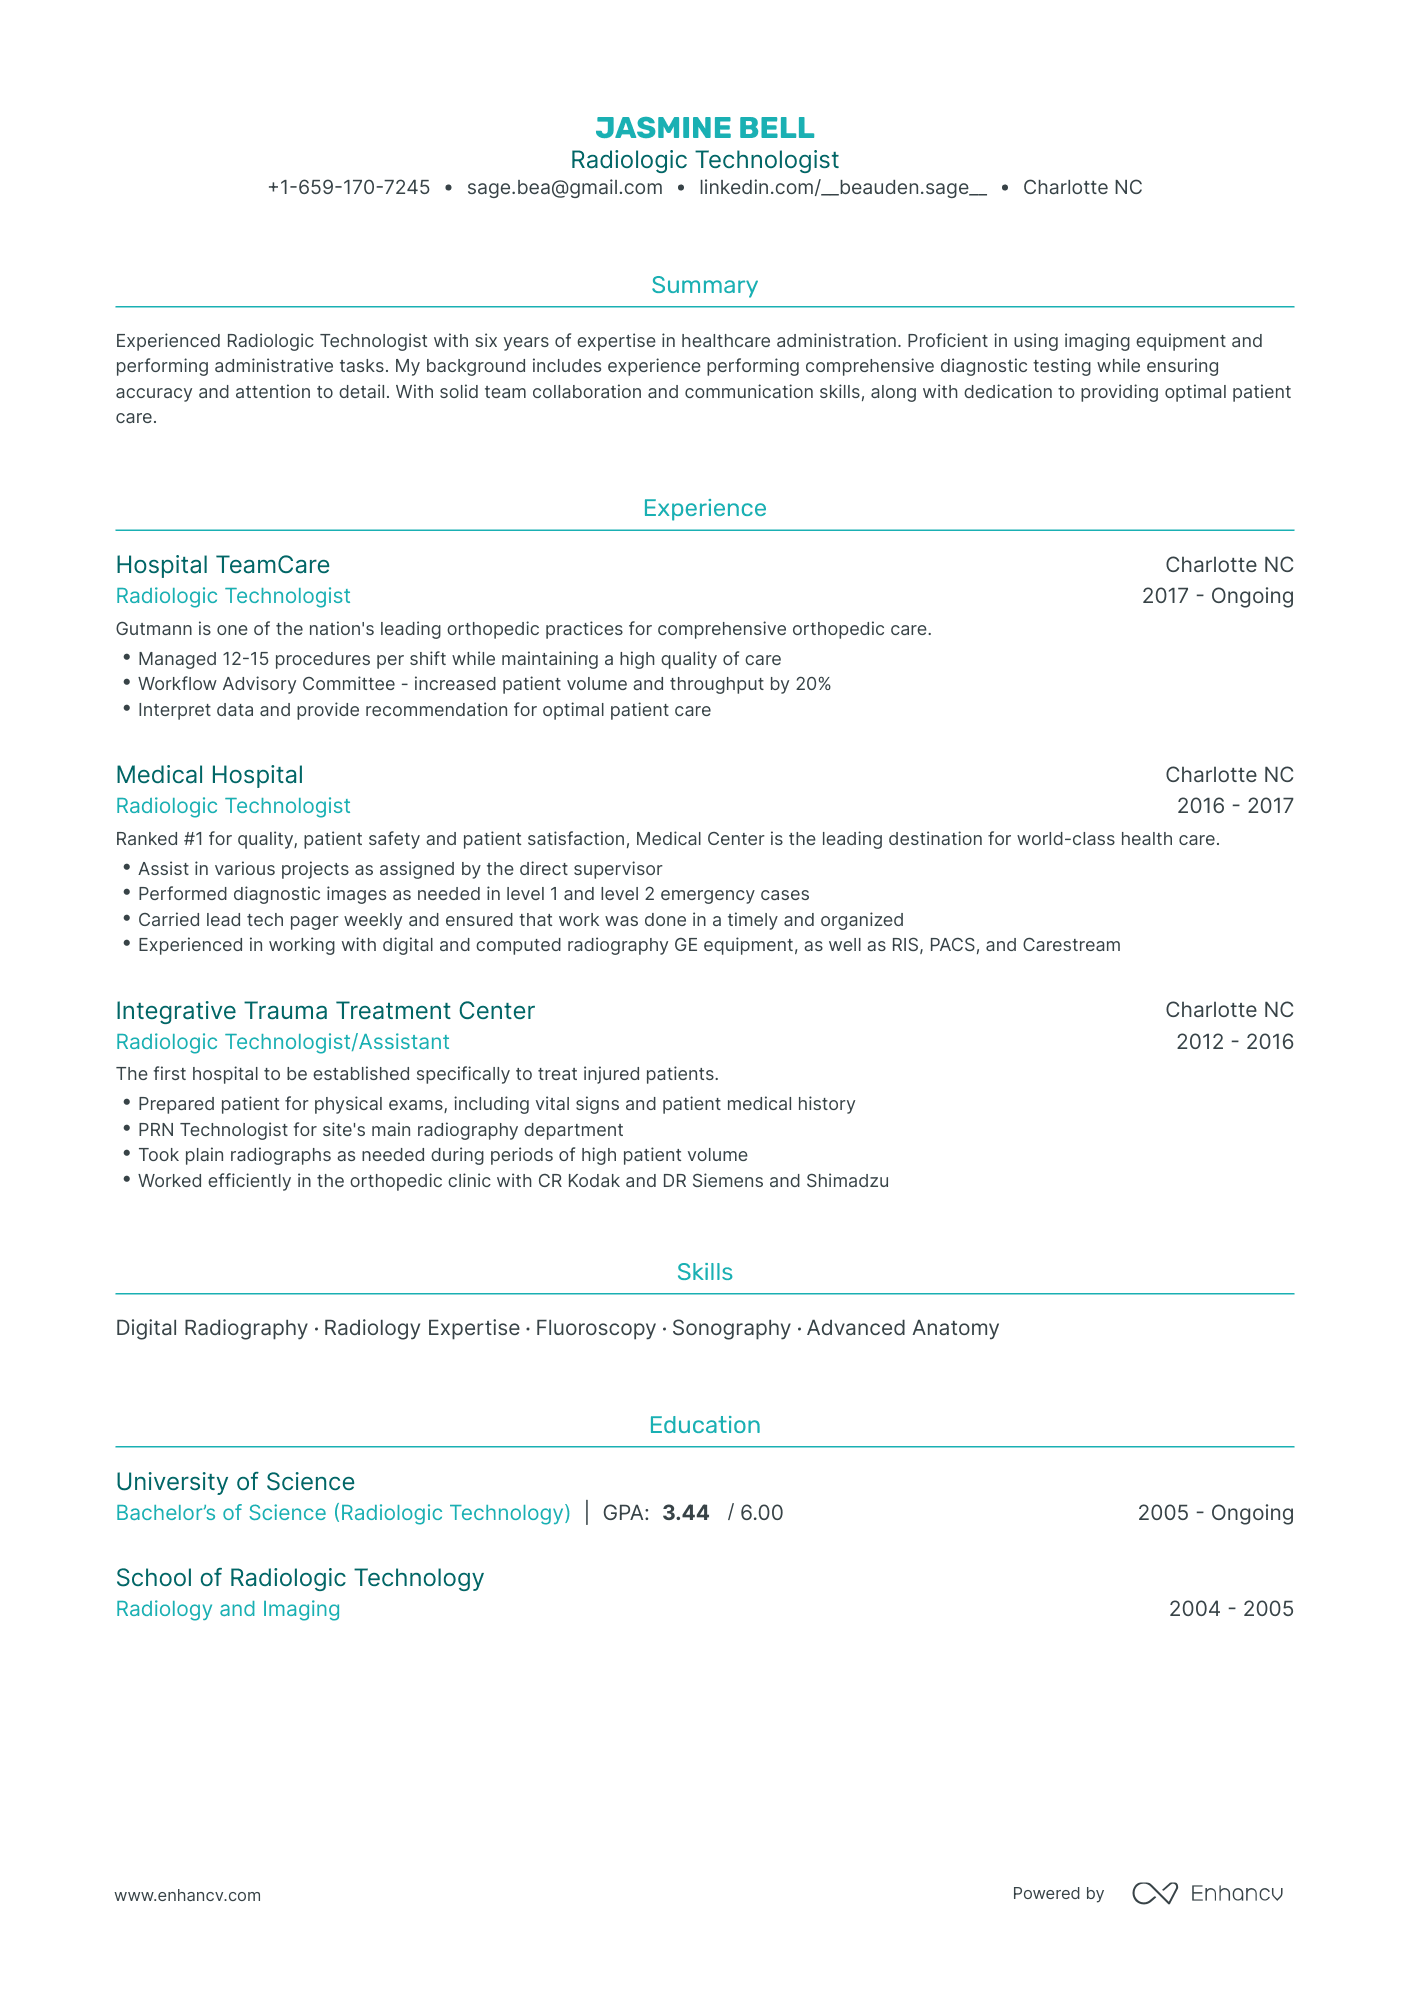 Traditional Radiologic Technologist Resume Template